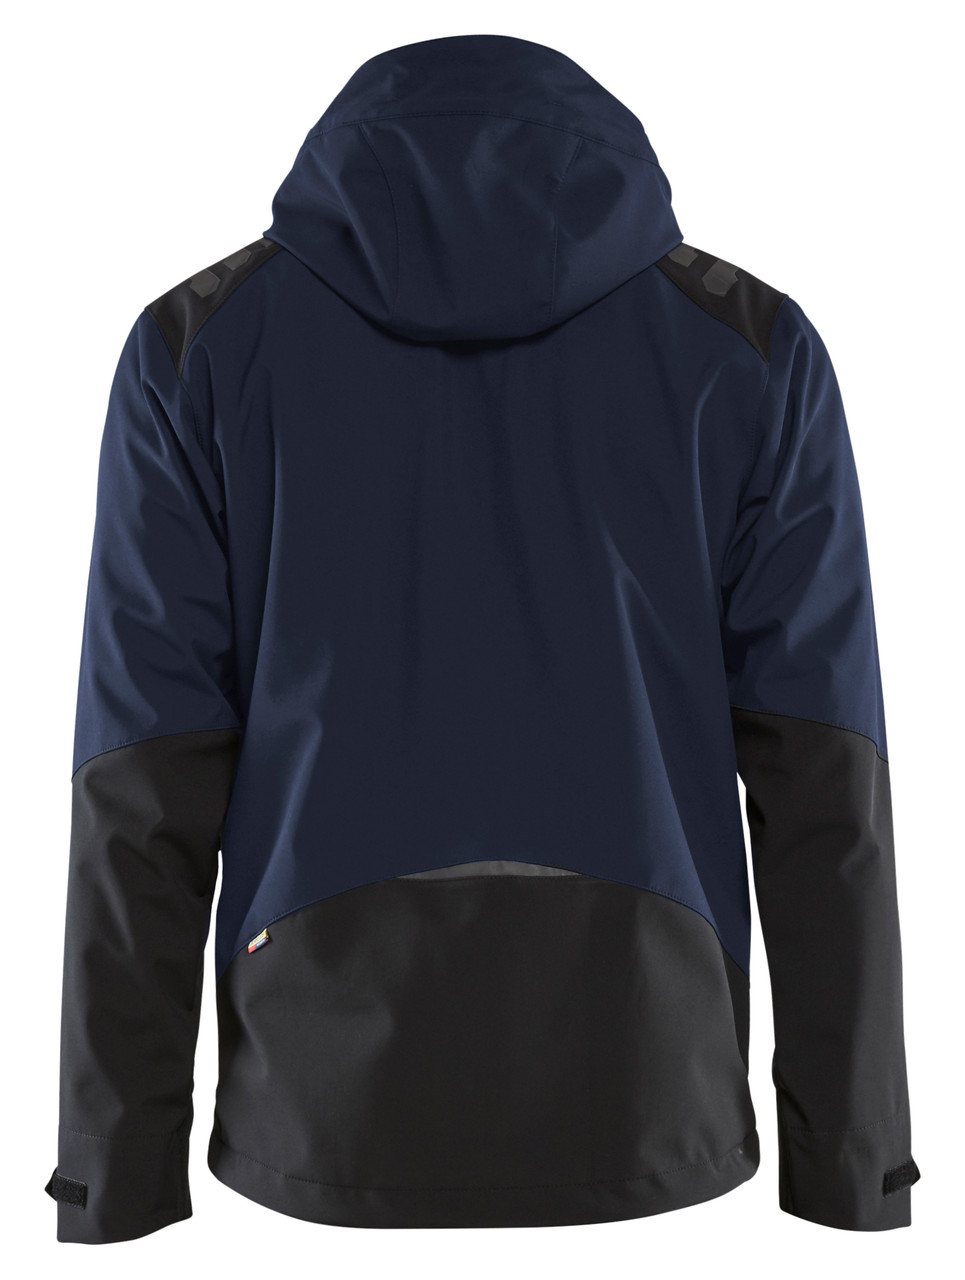 BLAKLADER Jacket  4749  with  for BLAKLADER Jacket  | 4749 Mens Dark Navy Blue Full Zip Jacket in Waterproof Softshell that have Full Zip  available in Australia and New Zealand